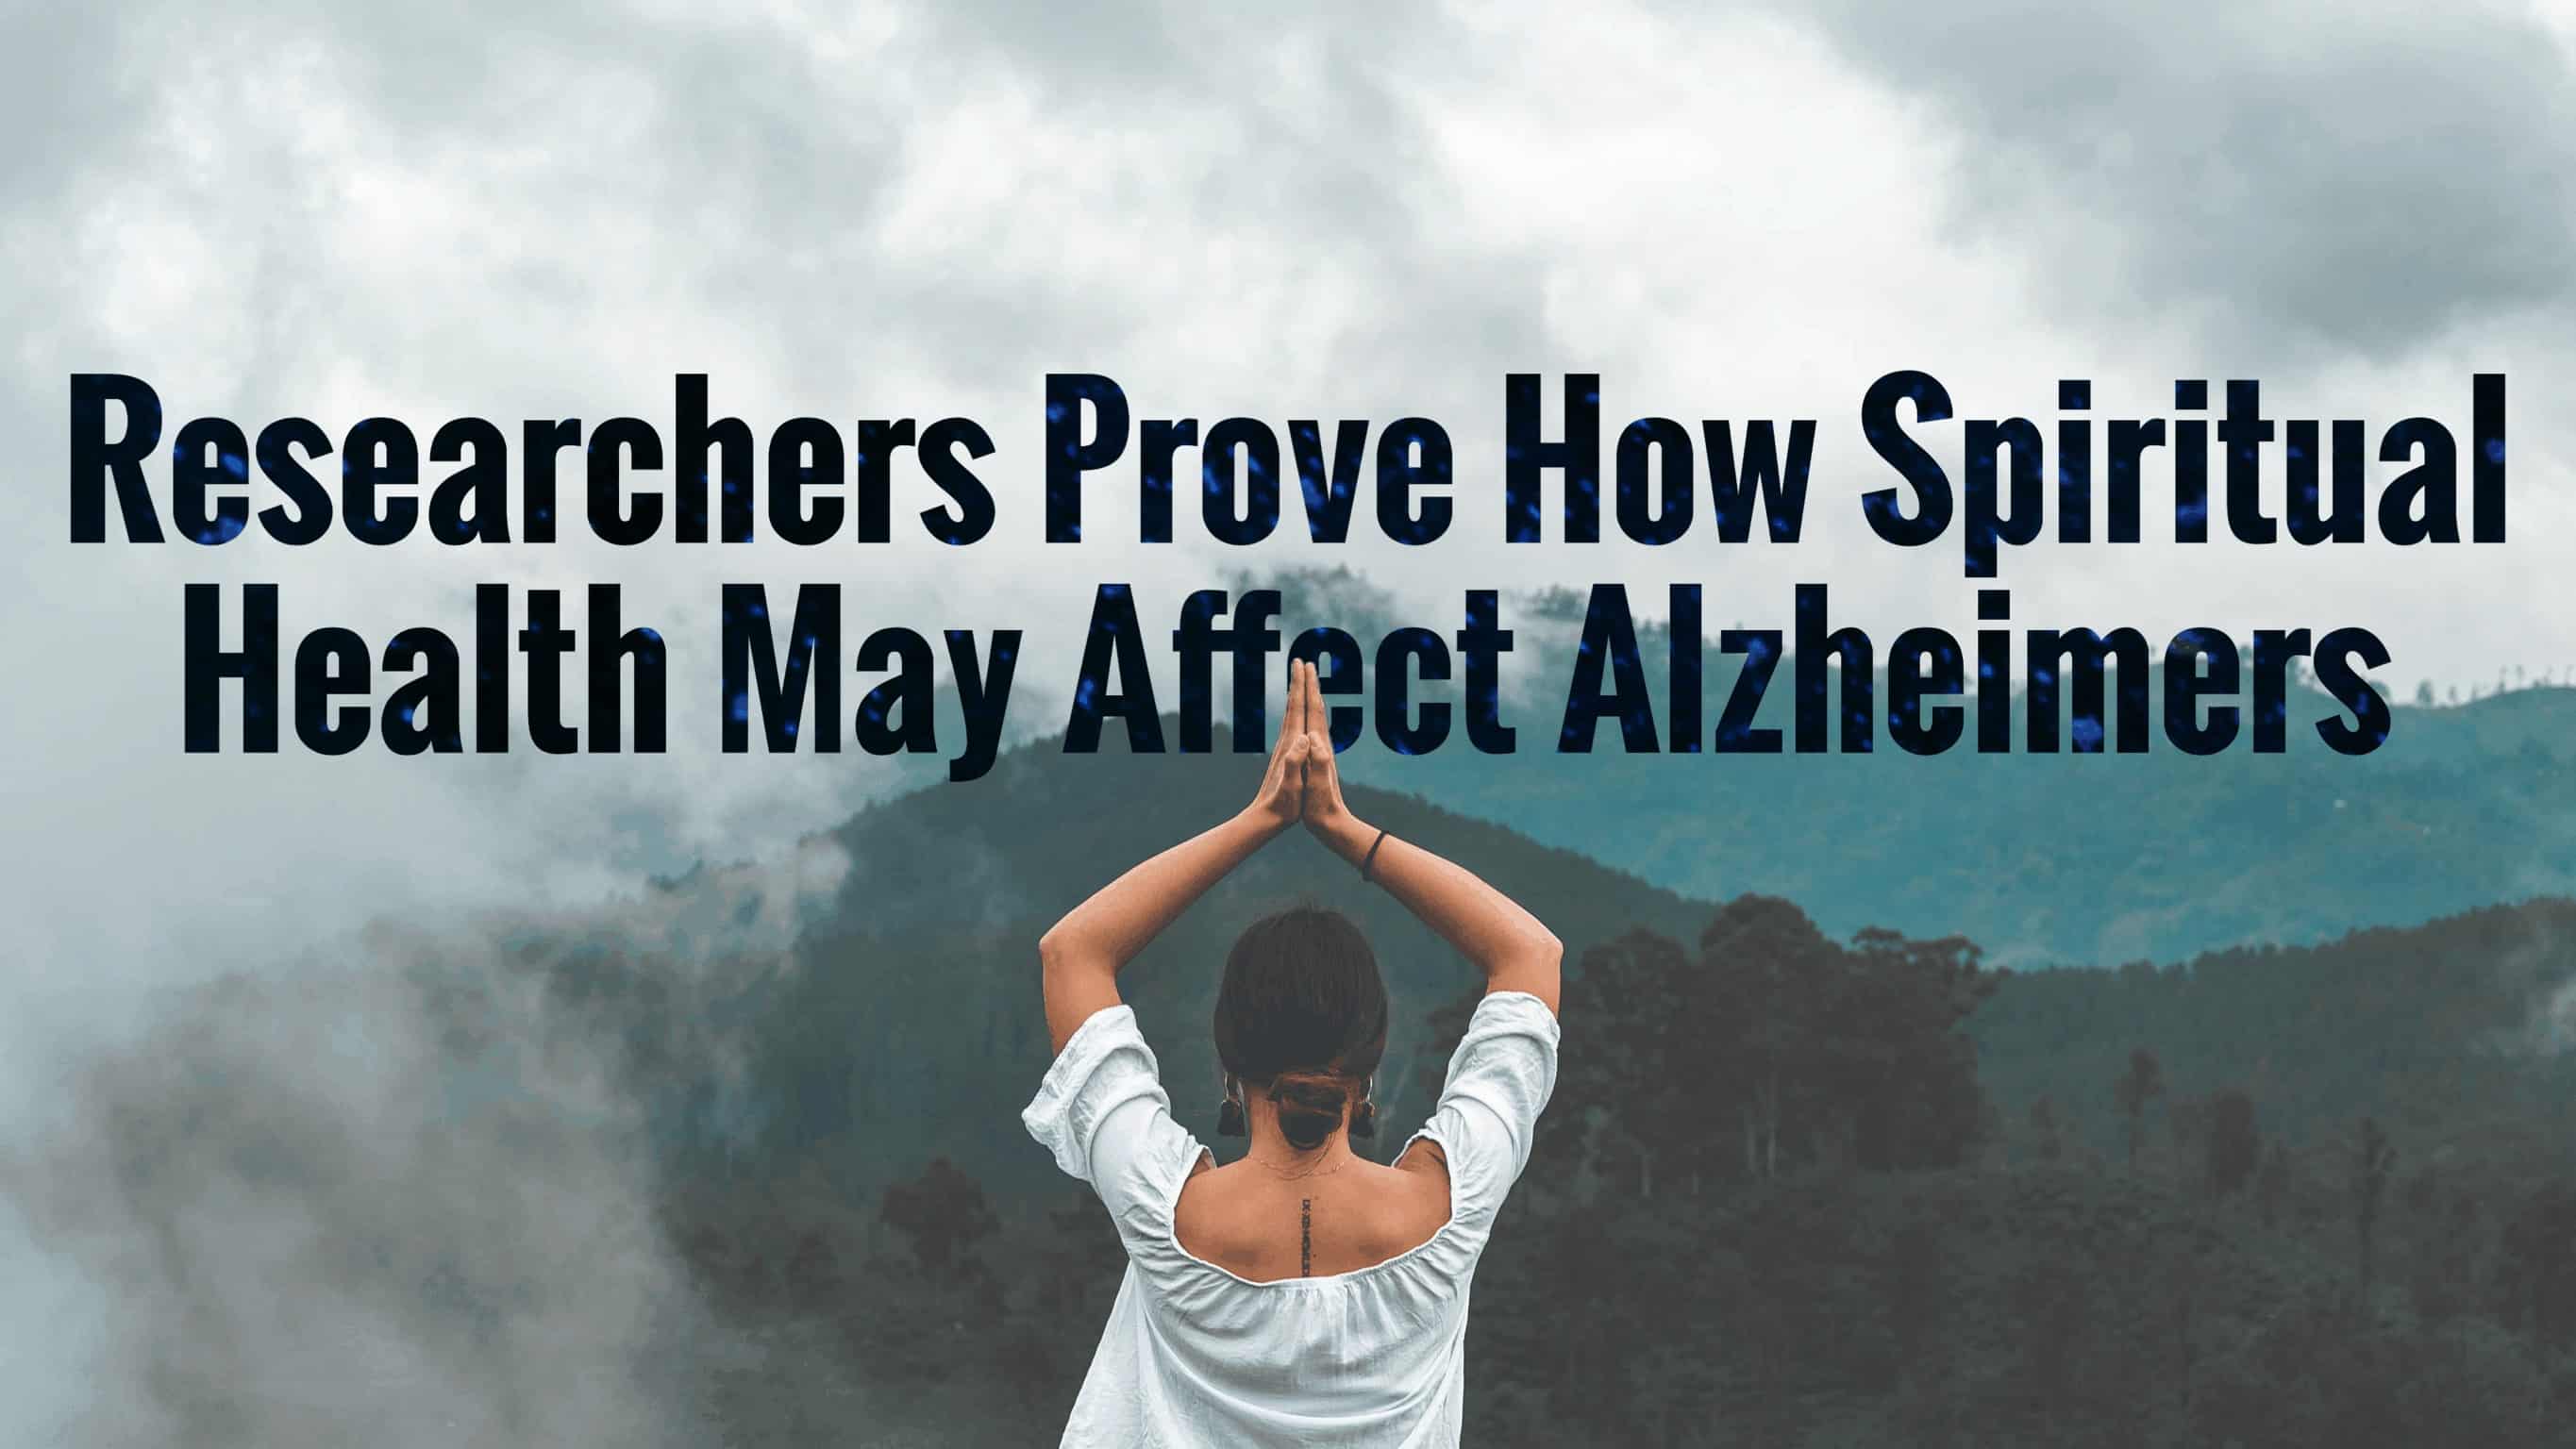 Researchers Prove How Spiritual Health May Affect Alzheimers